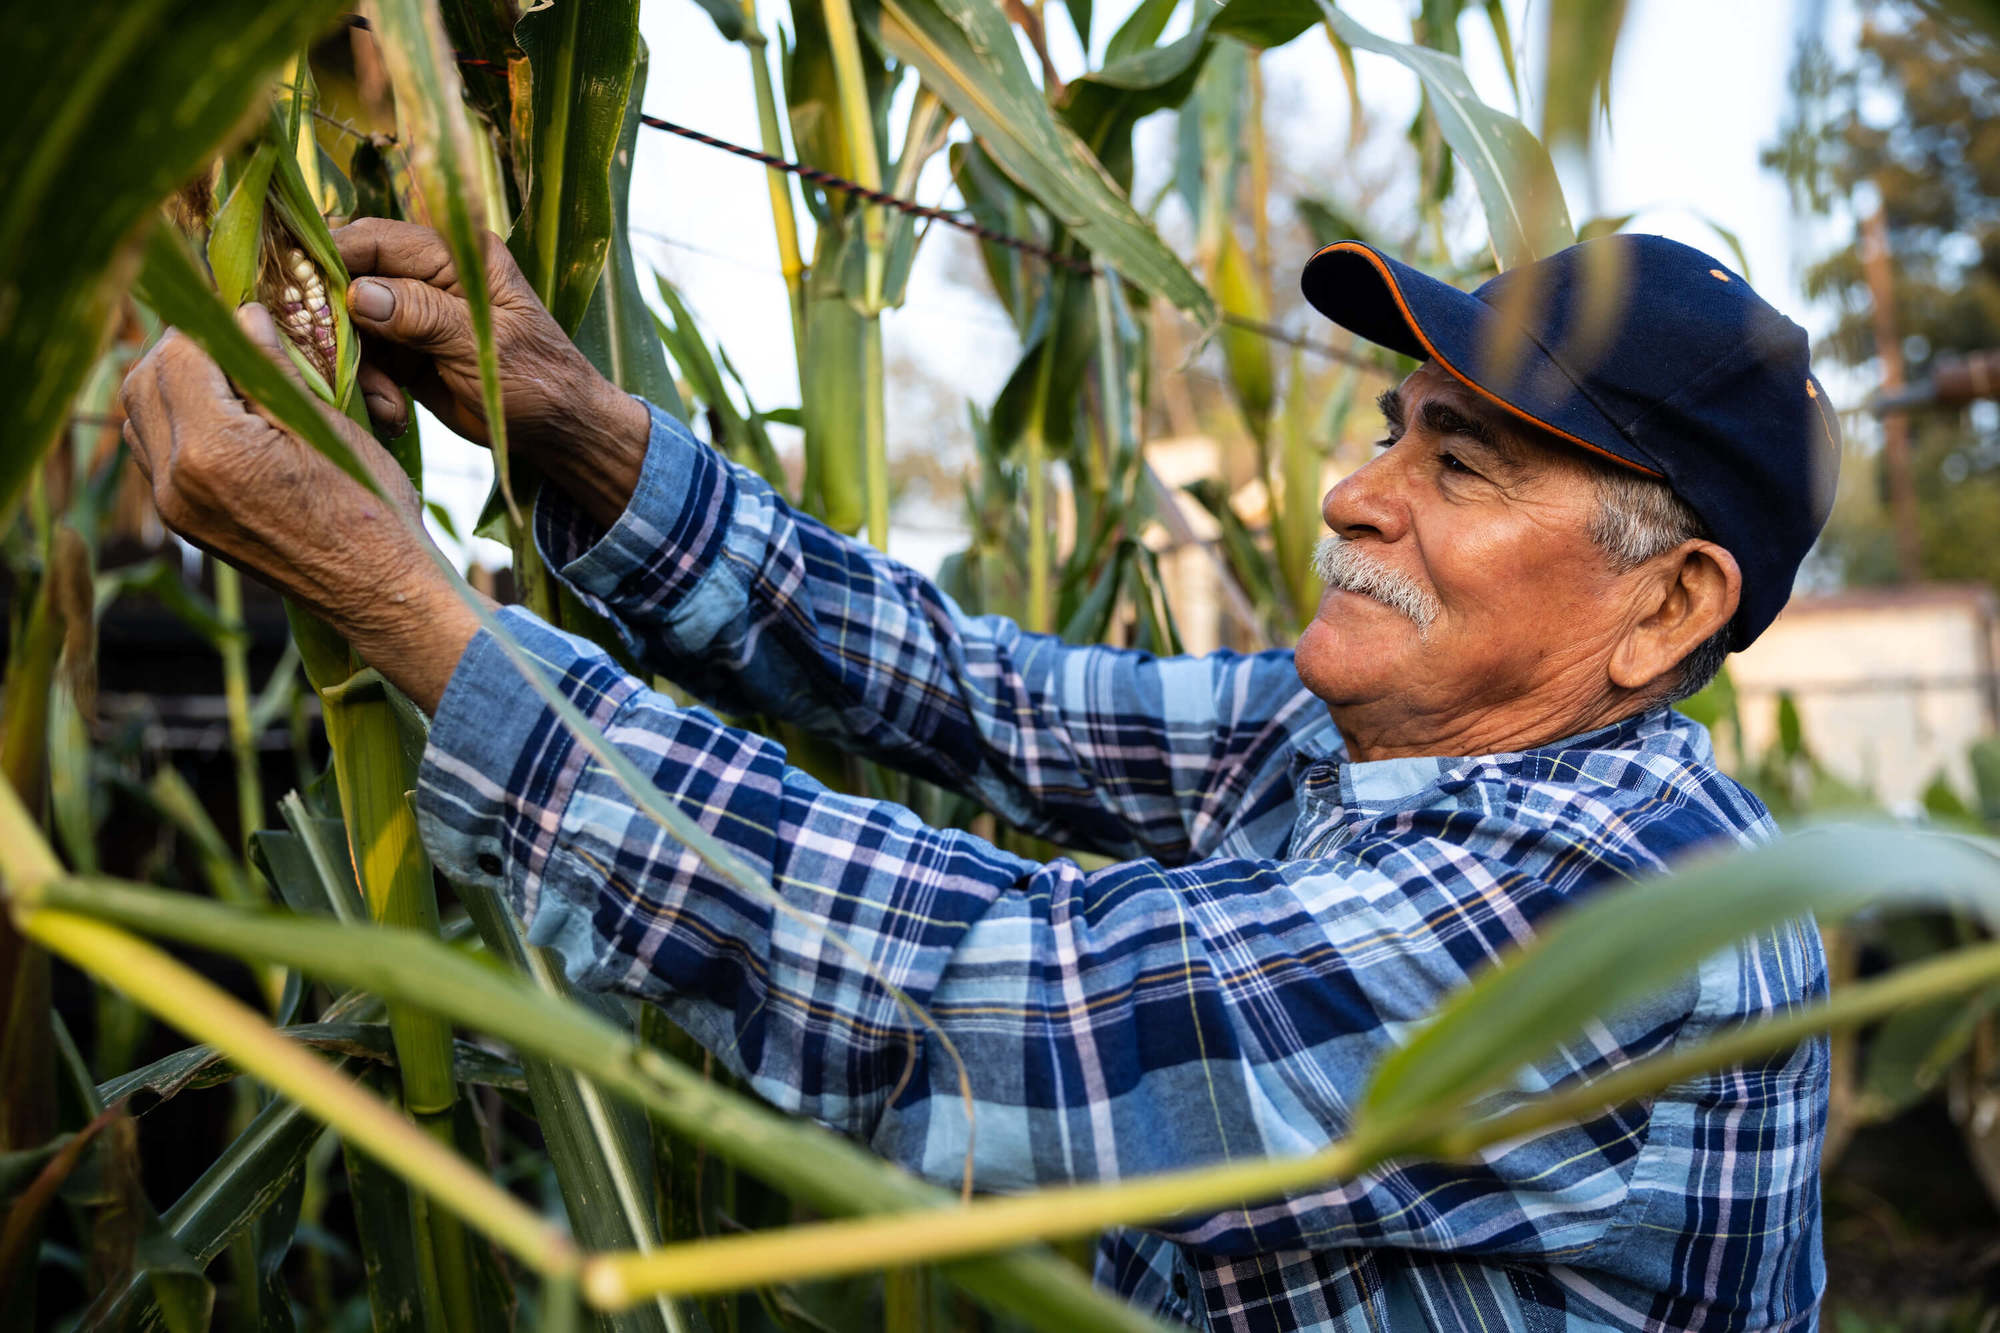 Alberto Dolores inspects corn that he grows in his backyard in Fuller Acres. The plants are grown with water from the community’s wells, which has been found to have high levels of 1,2,3-TCP.